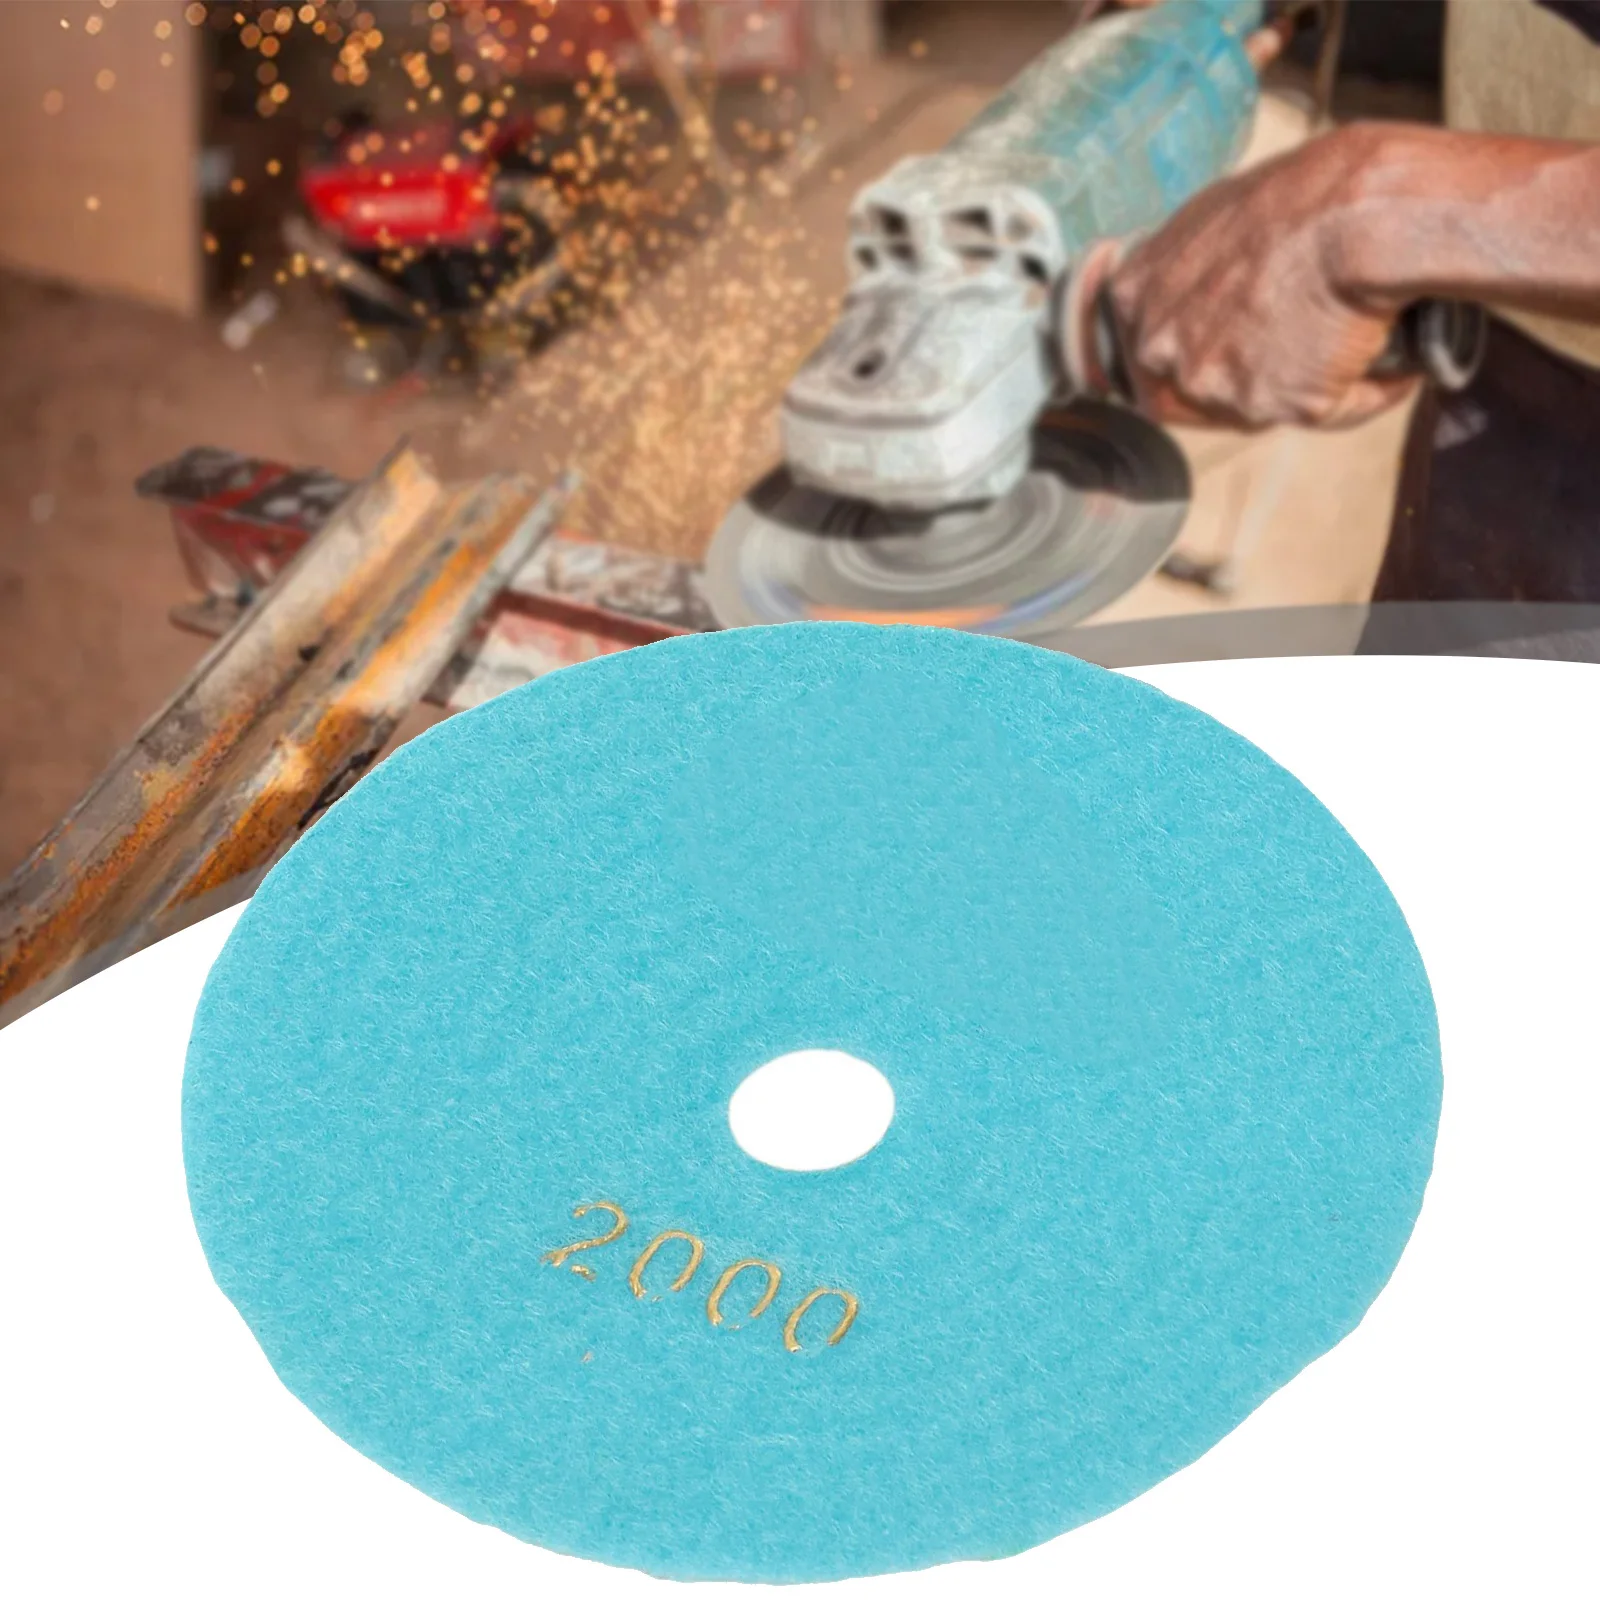 5 Inch 125mm Dry/Wet Diamond Polishing Pads Flexible Grinding Discs For Granite ,concrete,marble,limestone Fast Polishing 2024 geeetech 1kg 1 75mm tpu filament flexible material for 3d printers overseas warehouse fast shipping